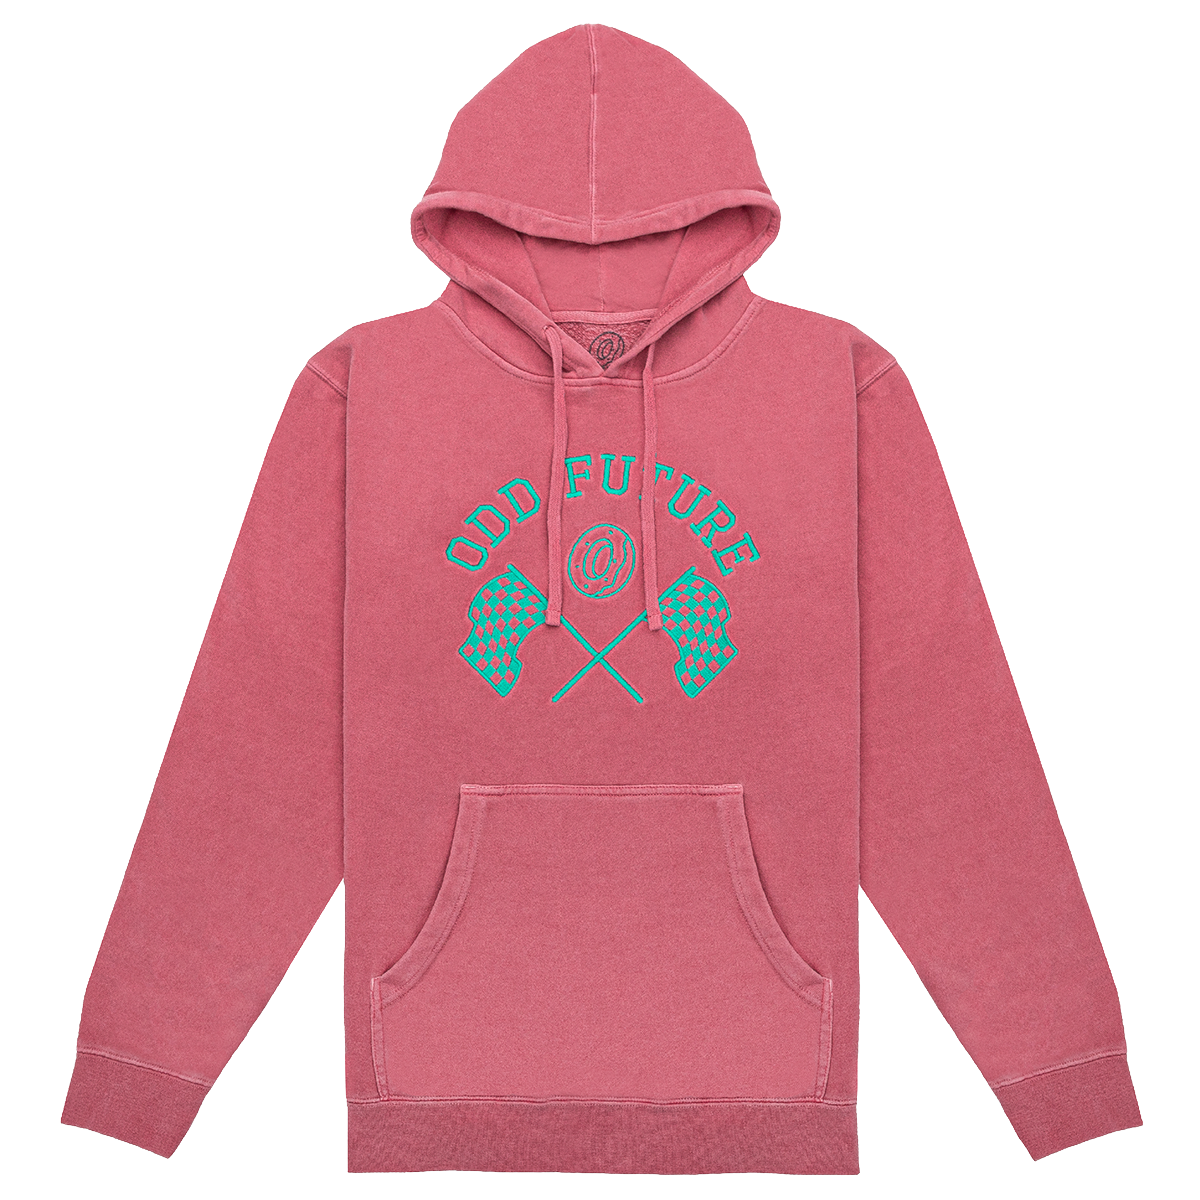 Checkered Flag Embroidered Pullover Hoodie - Pink - Odd Future OFWGKTA